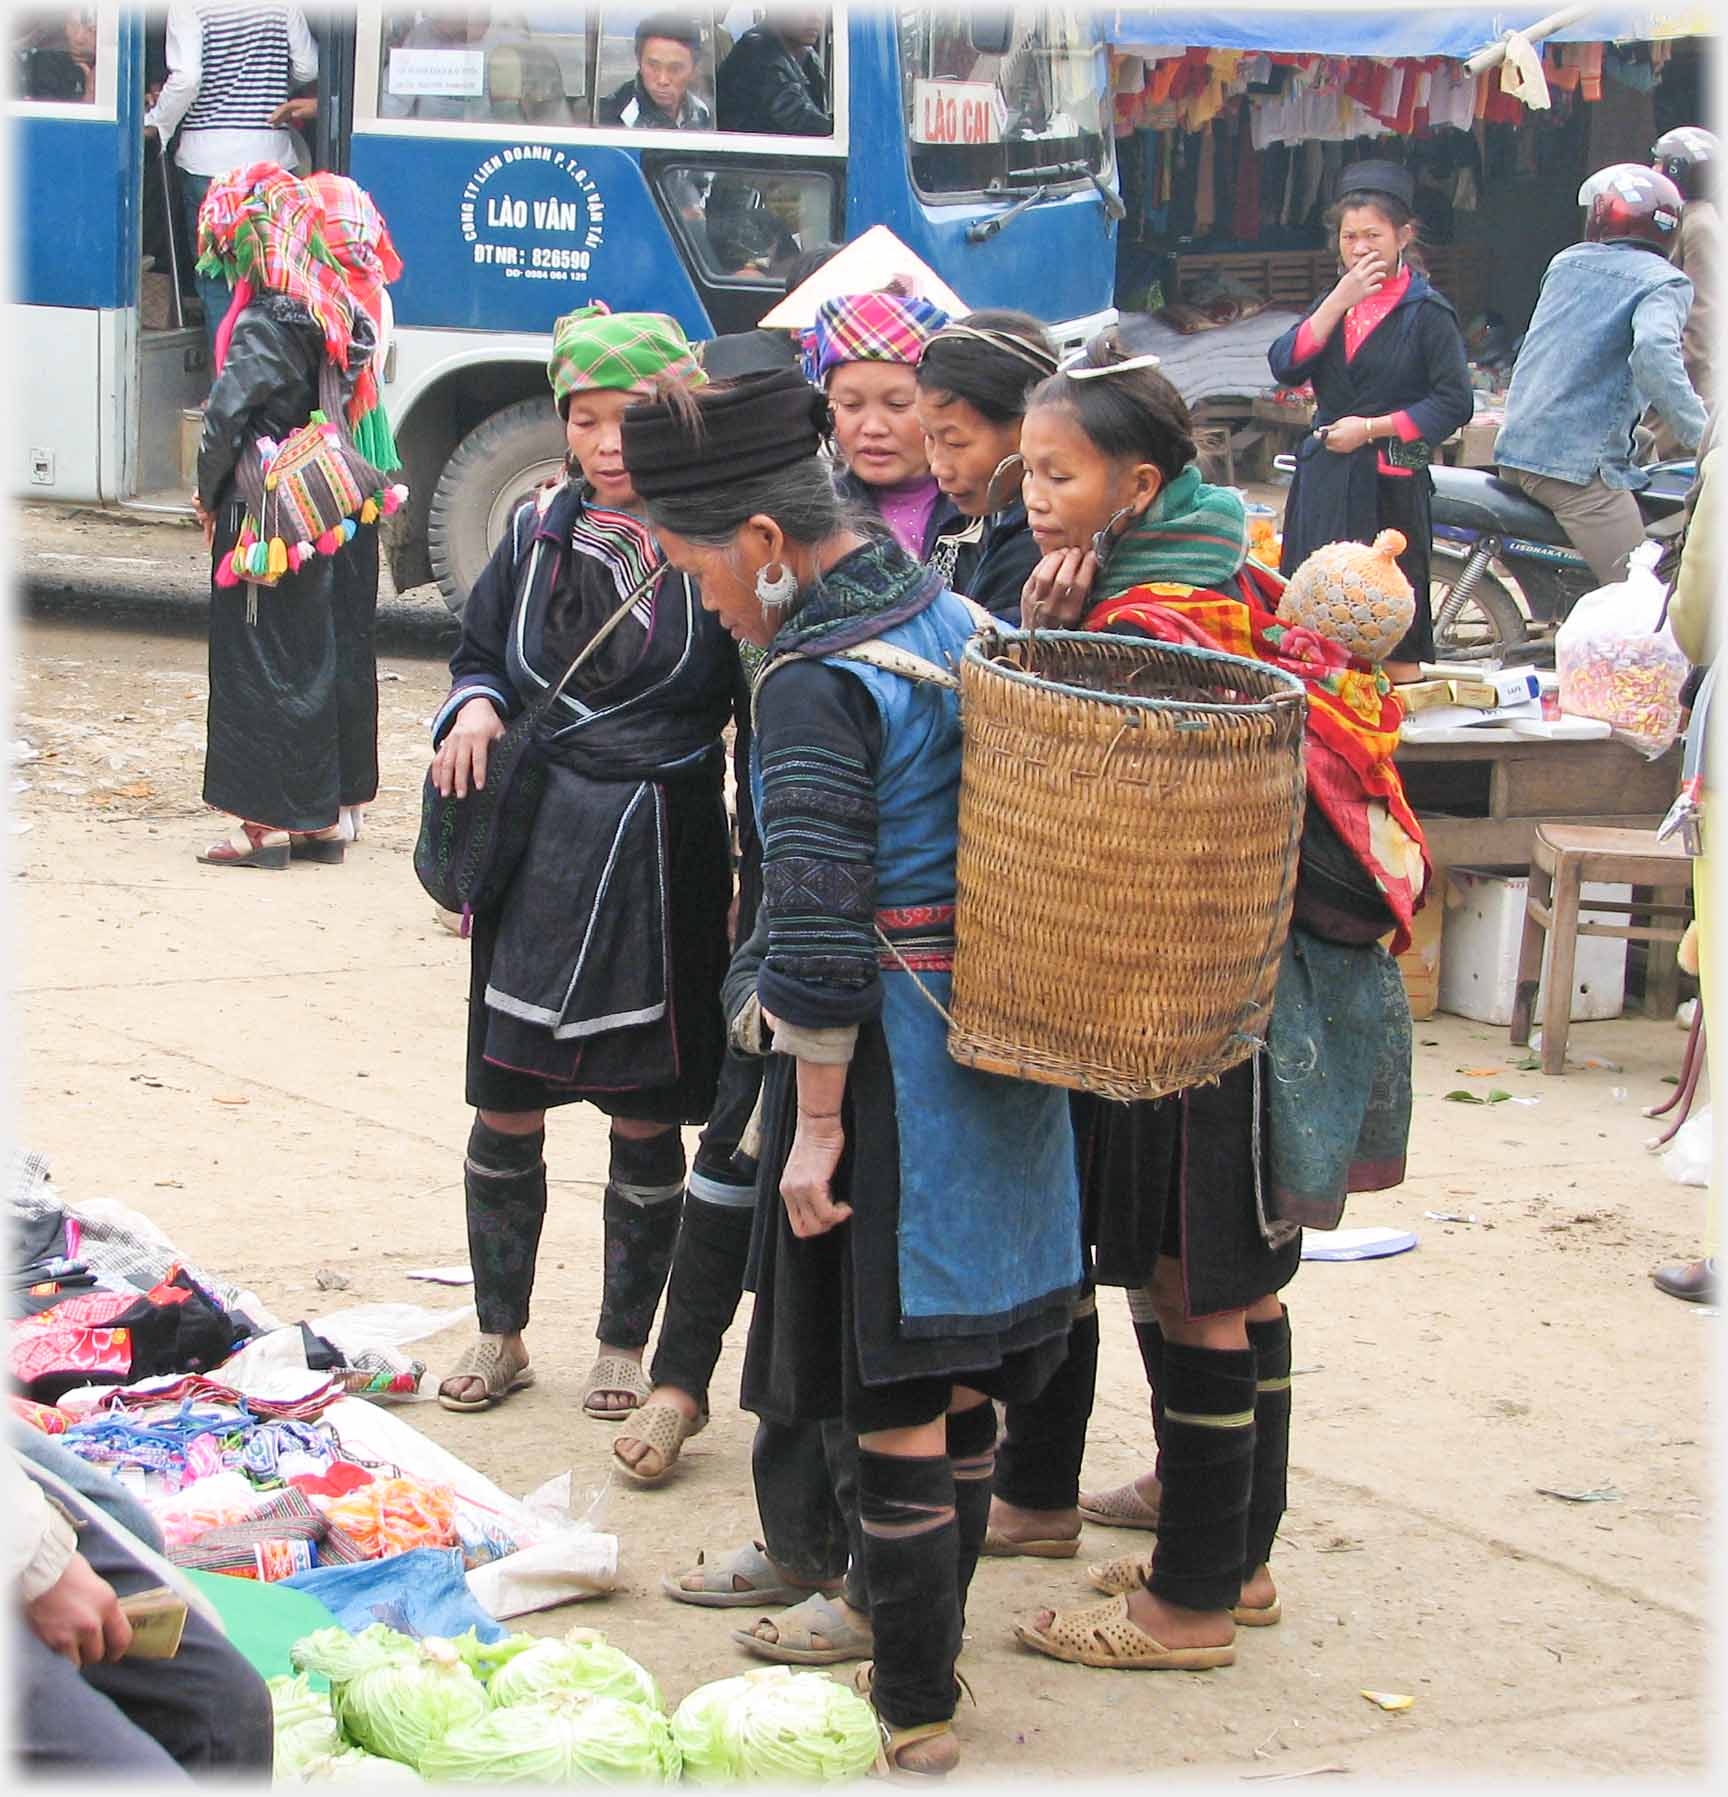 Group of women in black outfits including socks, knees bare, looking at produce, nearest one with large cylindrical woven basket on her back.